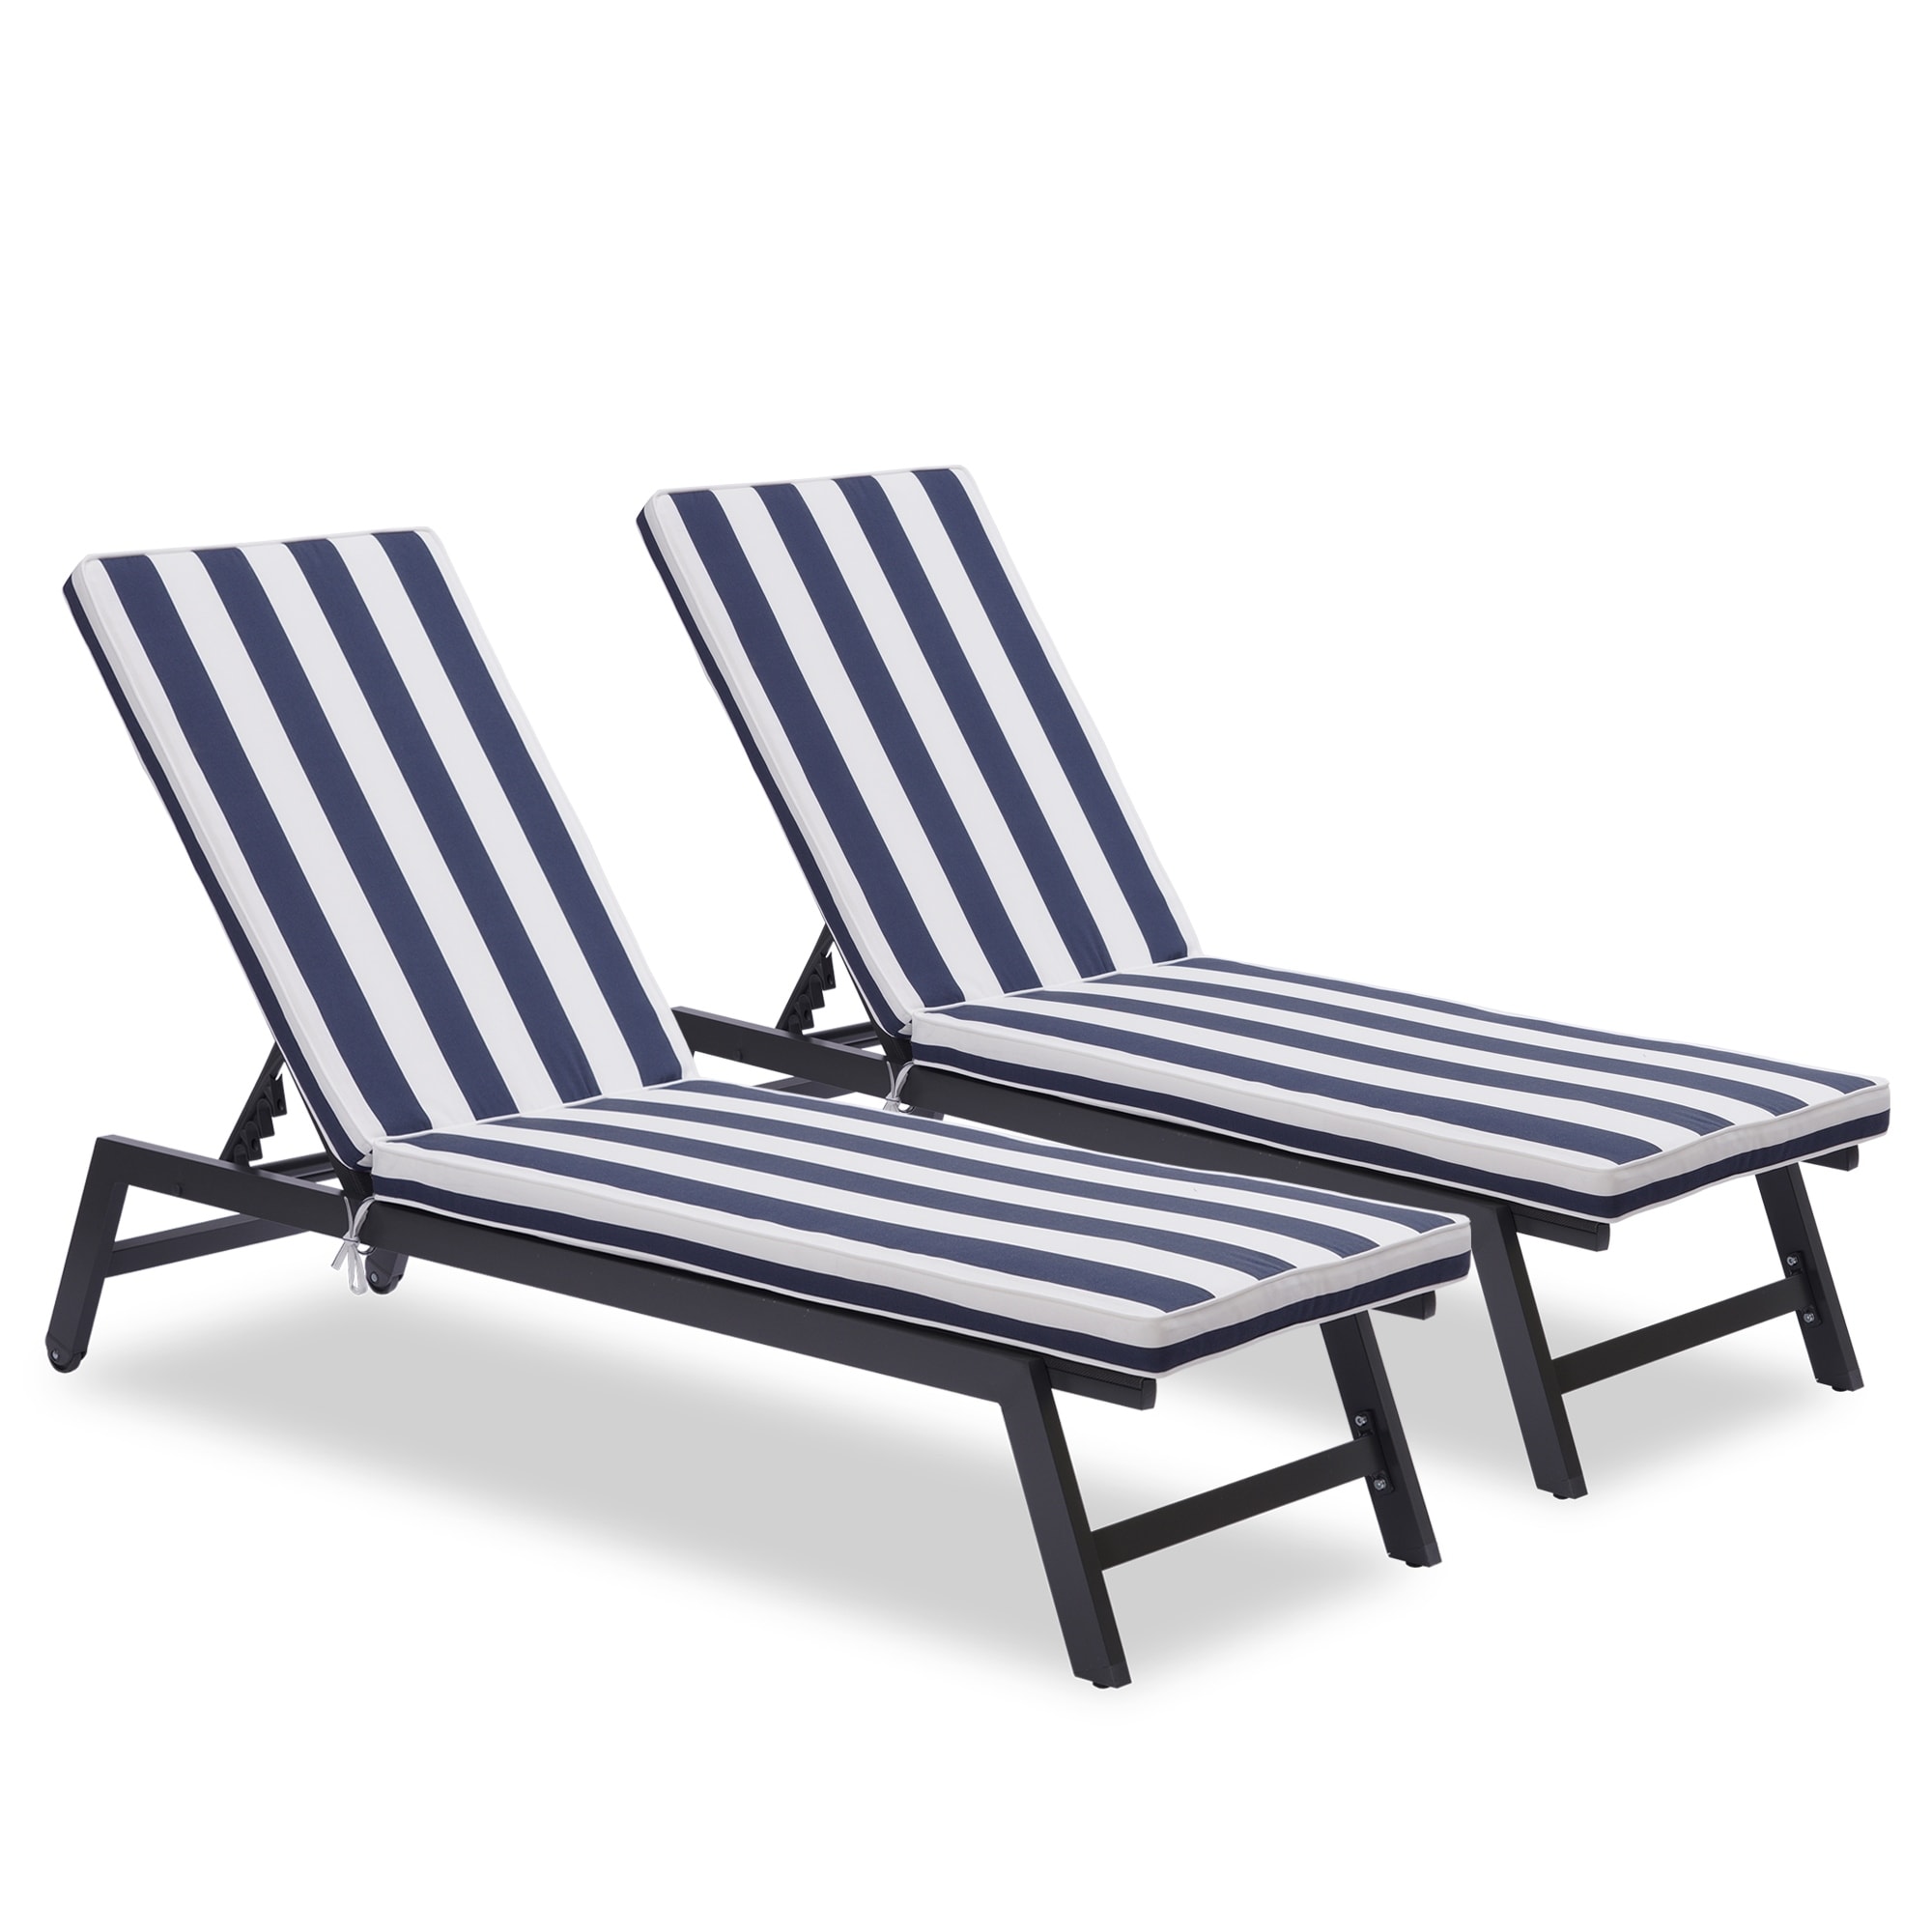 Outdoor Aluminum Adjustable Chaise Lounge Chair With Cushions